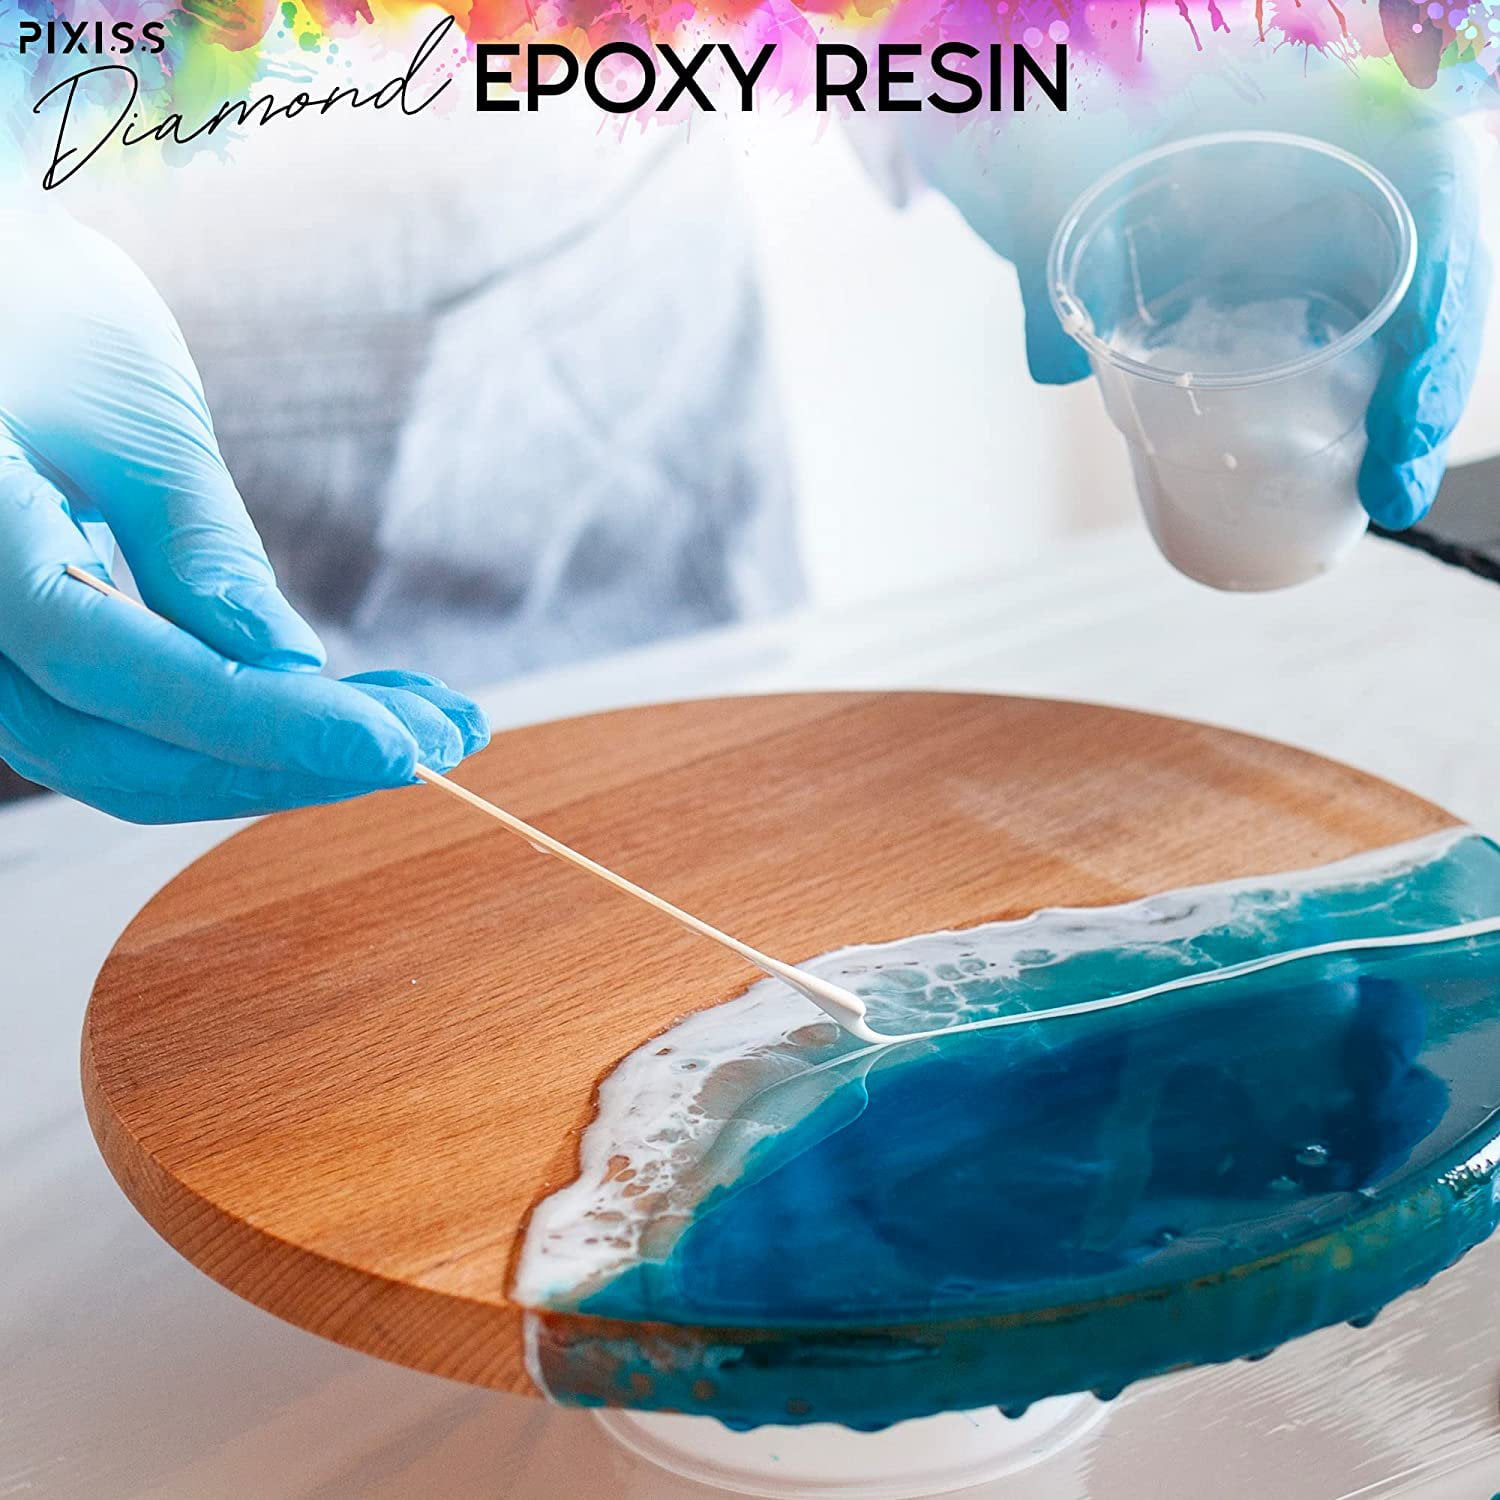 Epoxy Resin Crystal Clear Casting Resin for Epoxy and Resin Art Pixiss  Brand Easy Mix 1:1 Gallon Kit Supplies for Tumblers, Jewelry Resin, Molds,  Crafting Resin Kit 